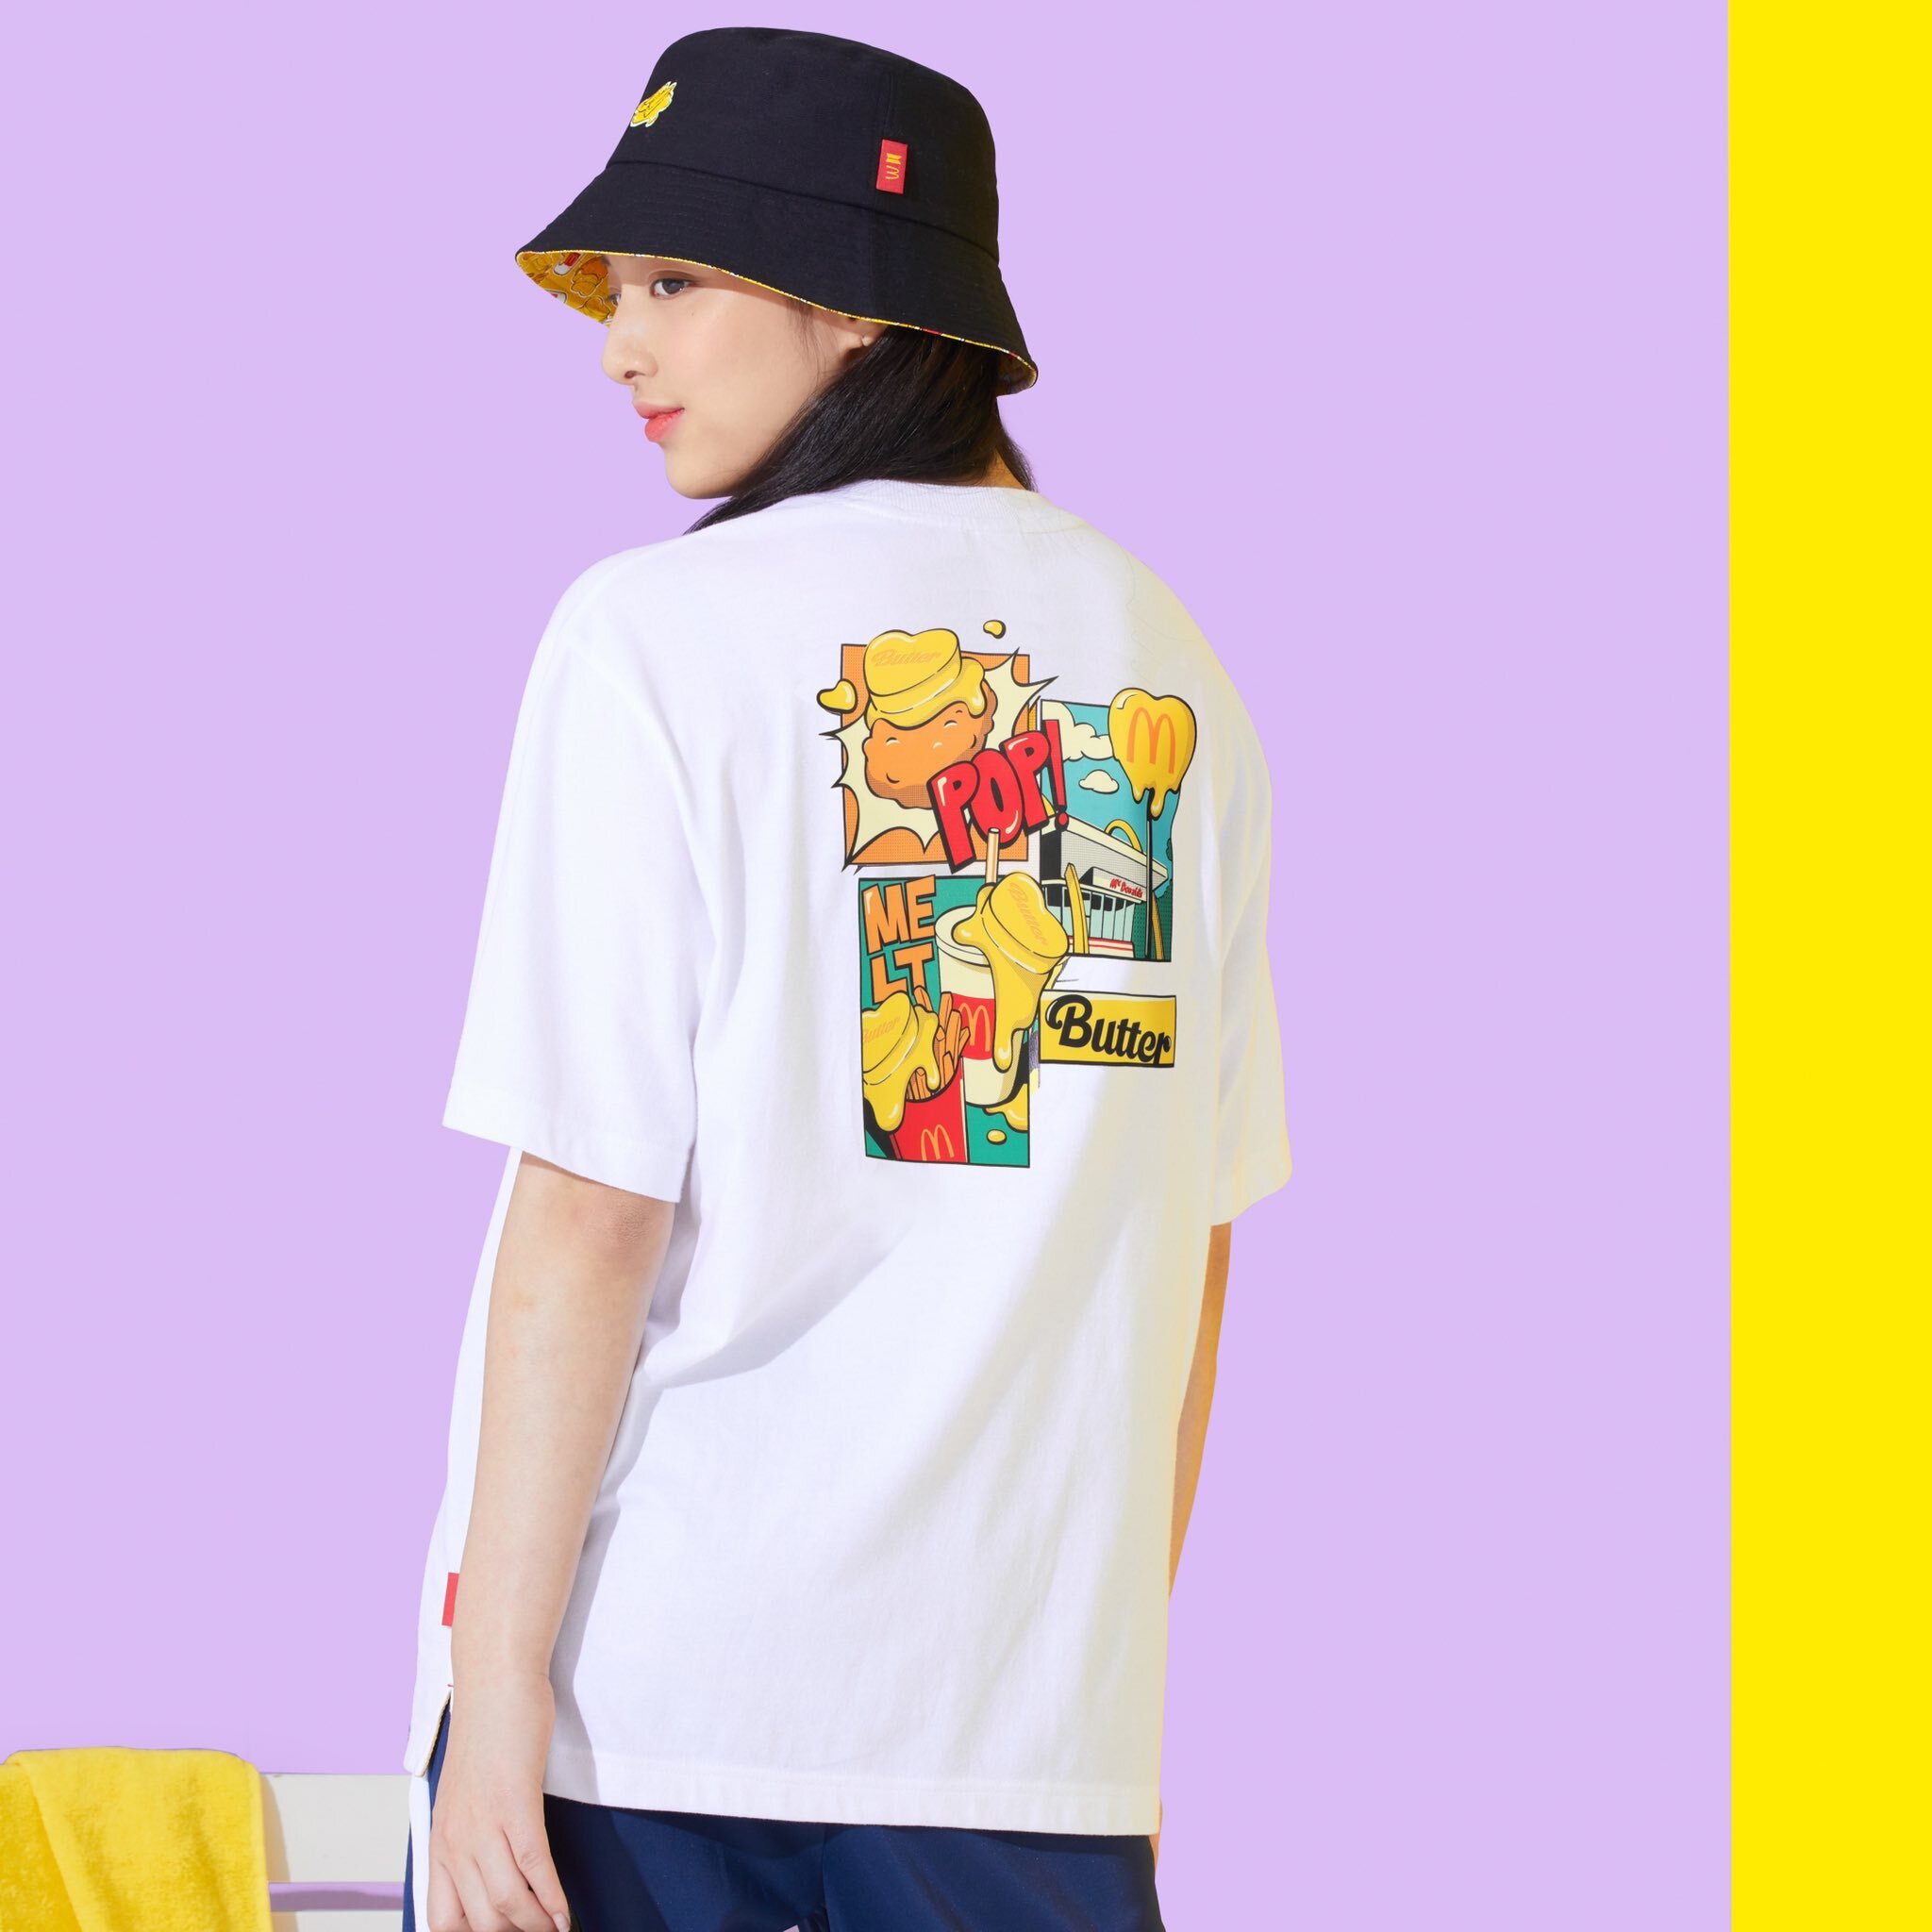 BTS and McDonald's Merchandise Collection: Photos, Where to Buy – WWD